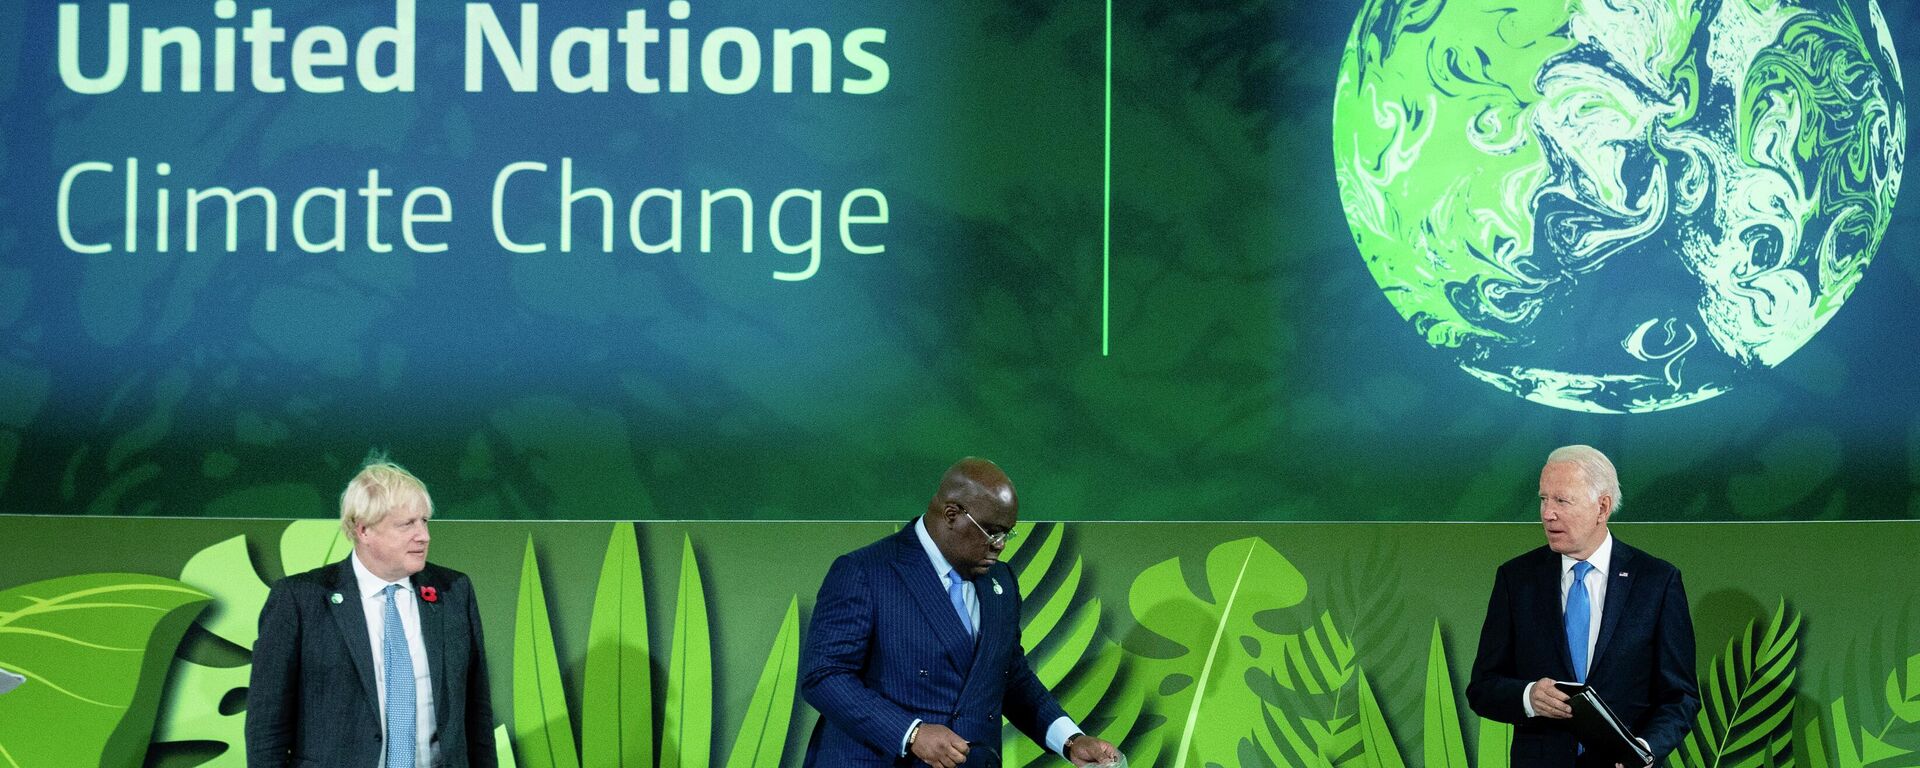 British Prime Minister Boris Johnson, President of Congo Felix Tshisekedi and President Joe Biden stand before speaking at a session on Action on Forests and Land Use, during the UN Climate Change Conference COP26 in Glasgow, Scotland, Tuesday, Nov. 2, 2021.  (Erin Schaff/The New York Times via AP, Pool) - Sputnik International, 1920, 03.10.2022